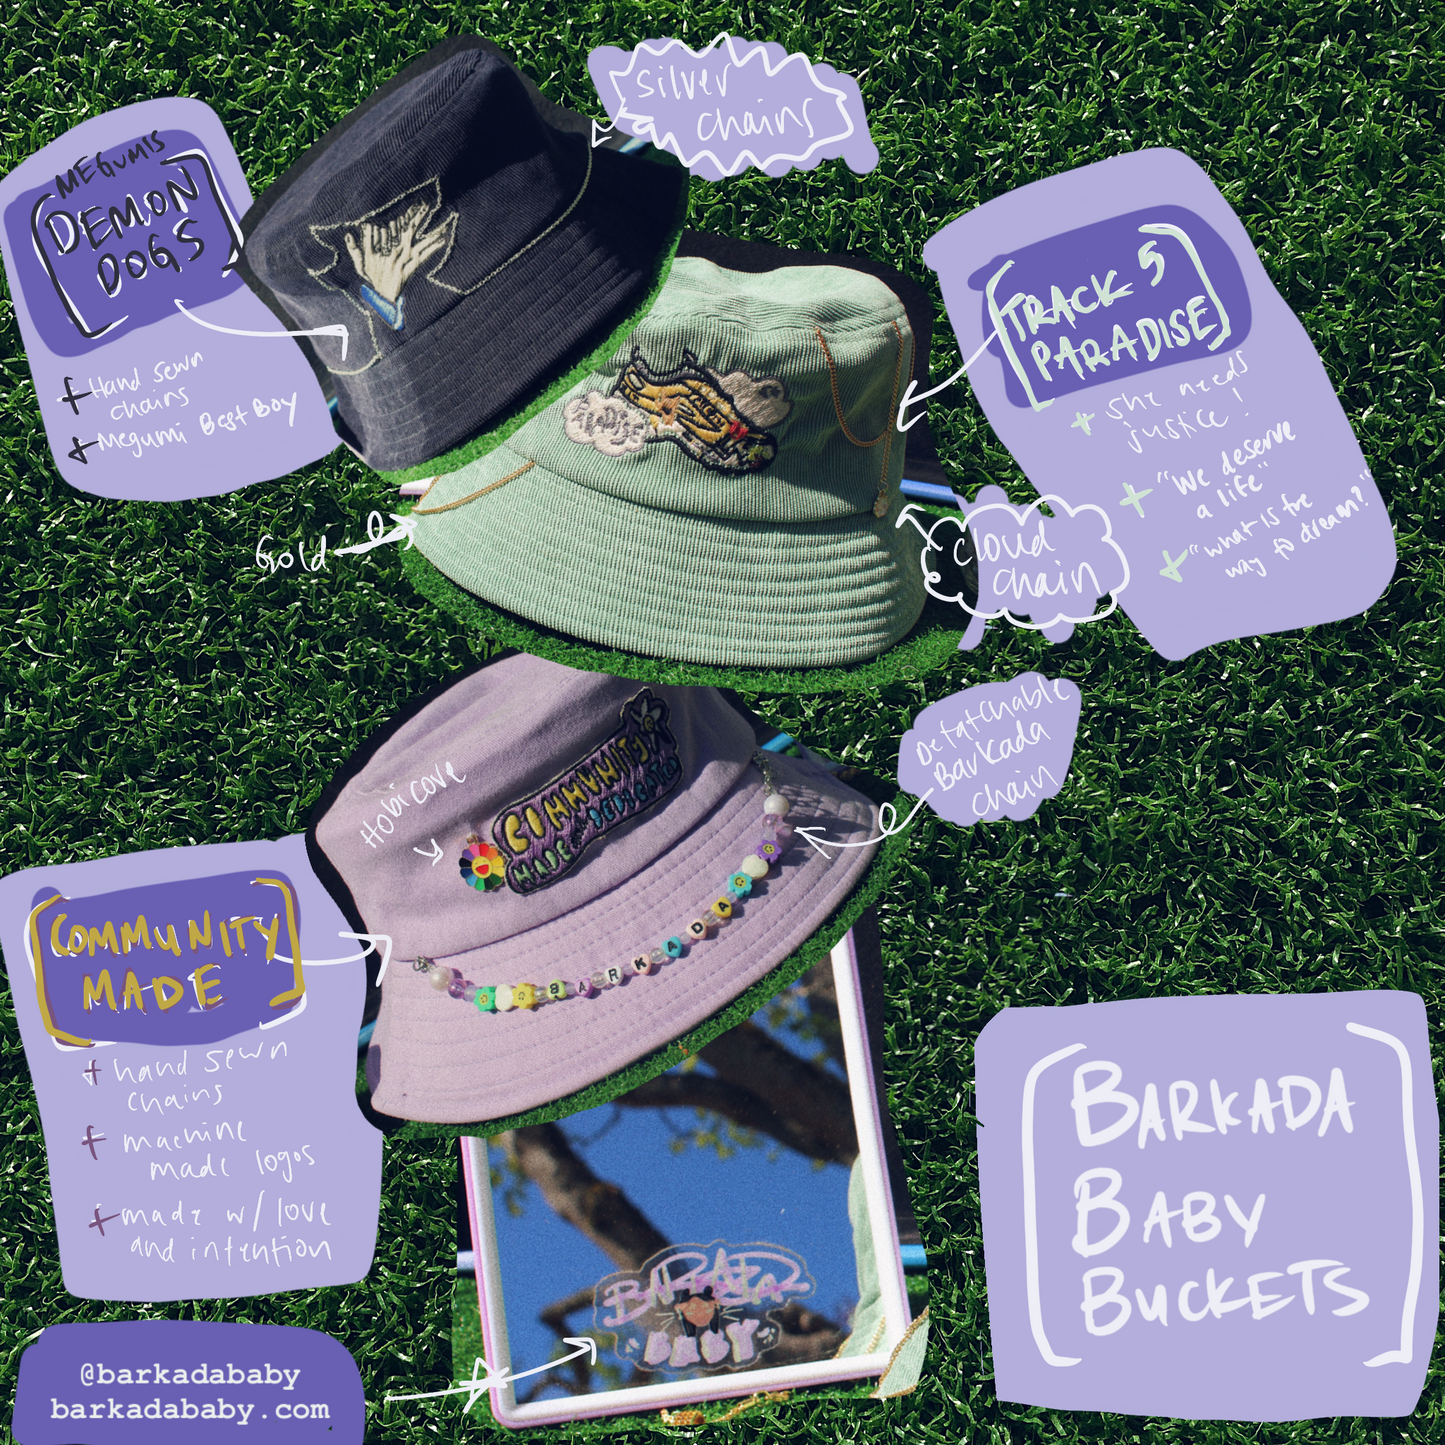 fake grass background with three hats stacked on top of eachother on top of a mirror with a barkada baby sticker on it. there are captions that the description reads on it